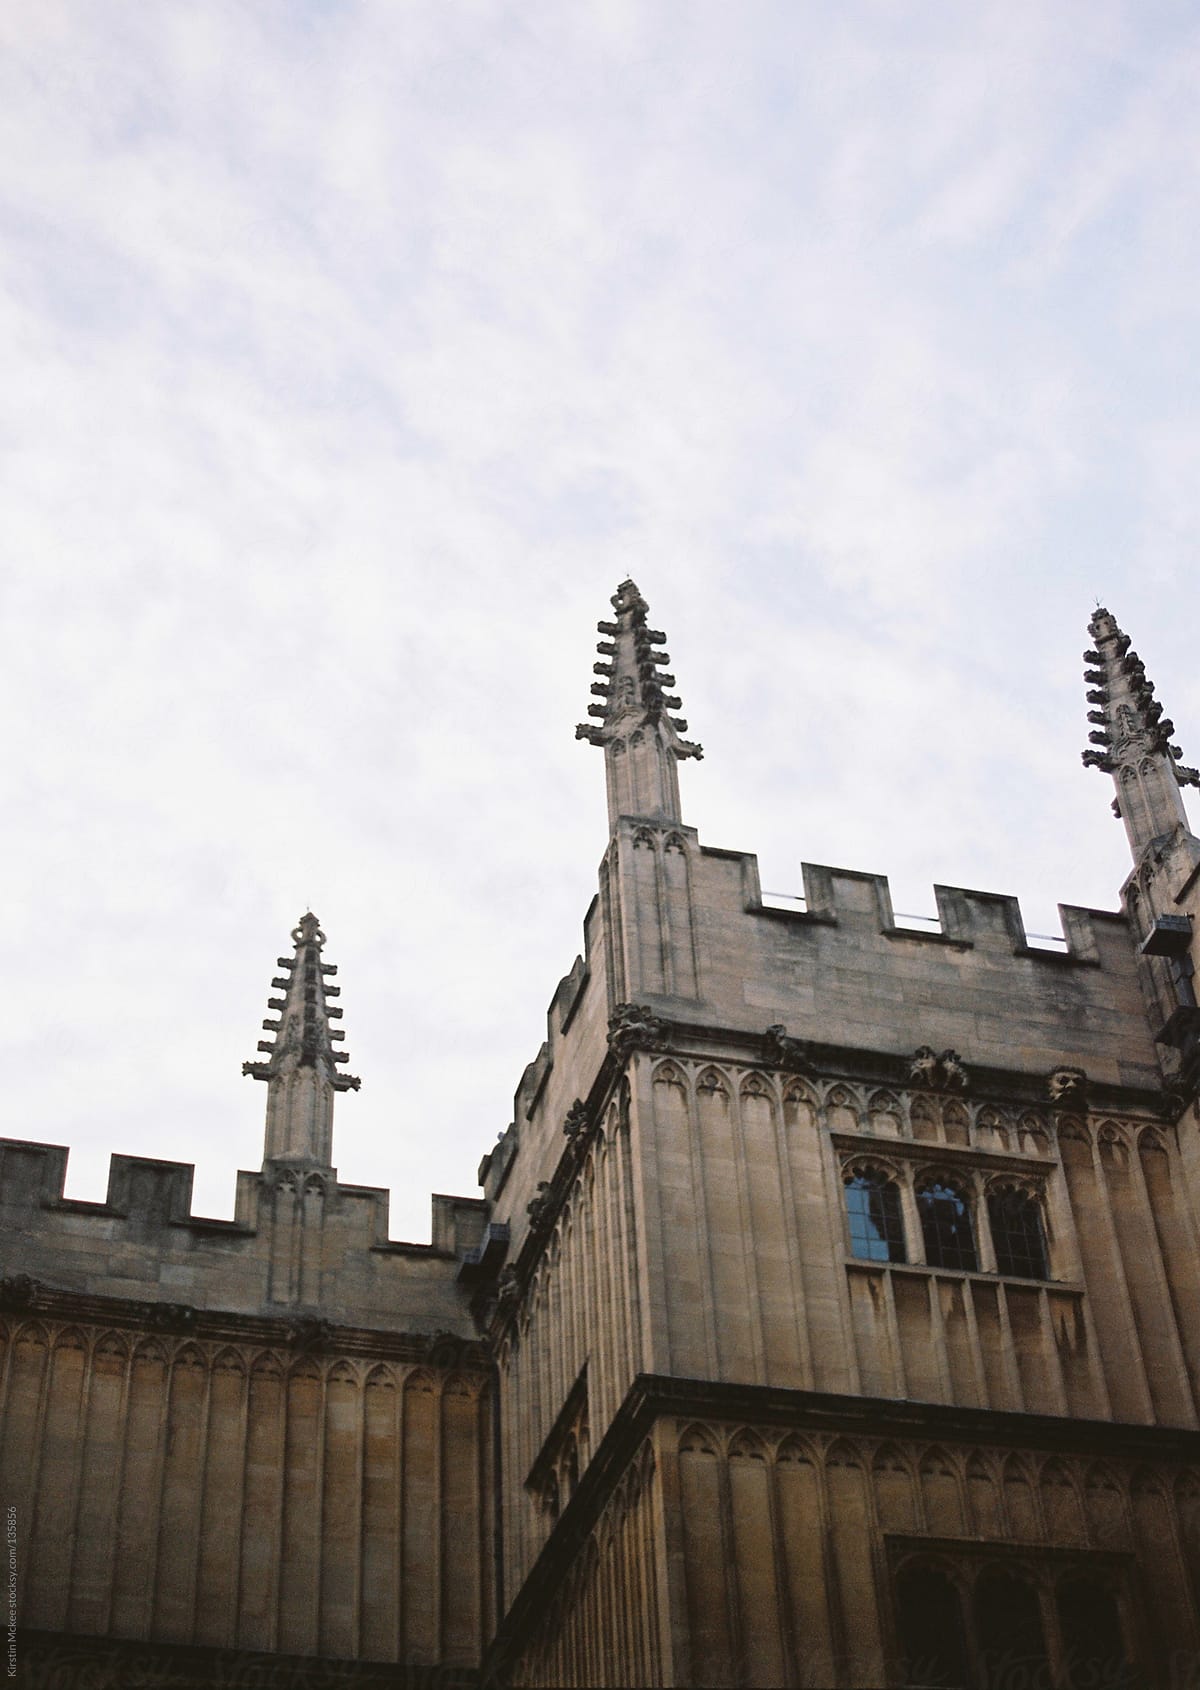 Detail of the exterior of the Bodleian Library, Oxford.